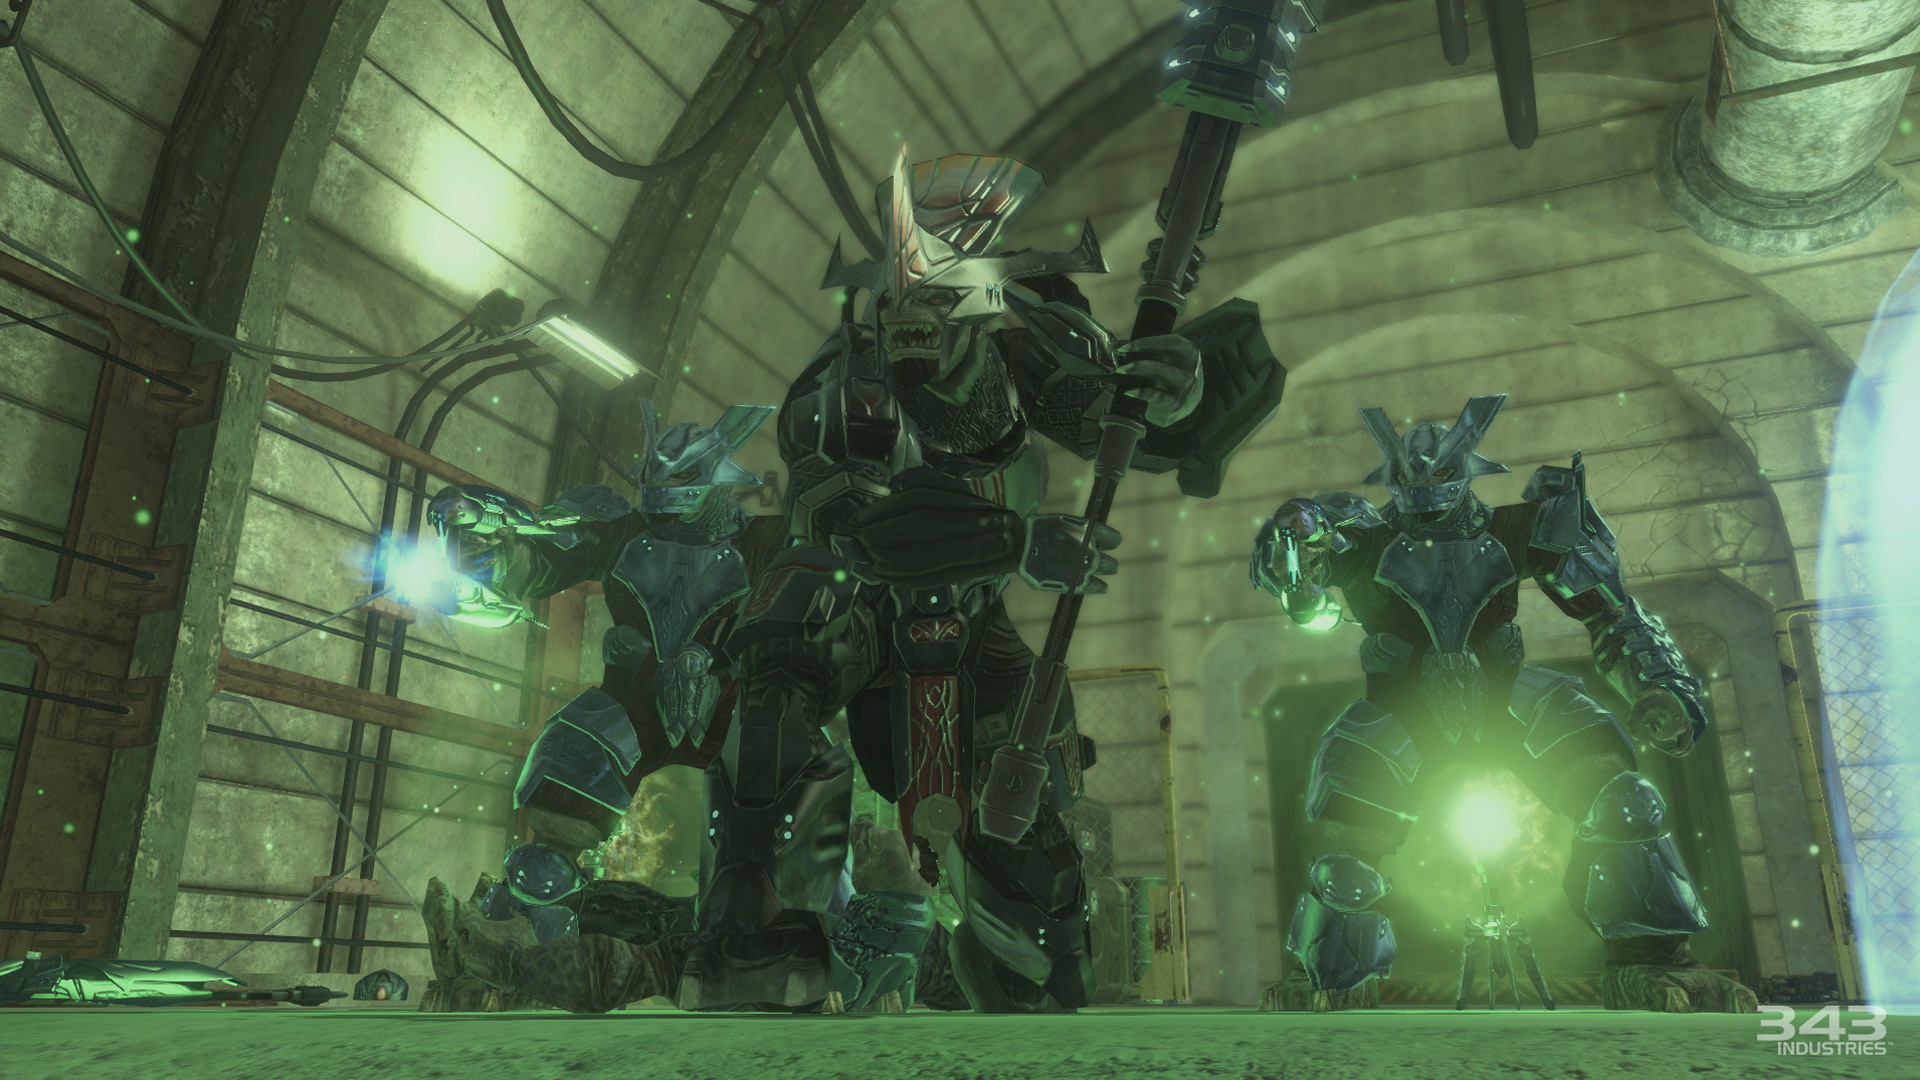 Halo: The Master Chief Collection Is More Than Just A Nostalgia Trip